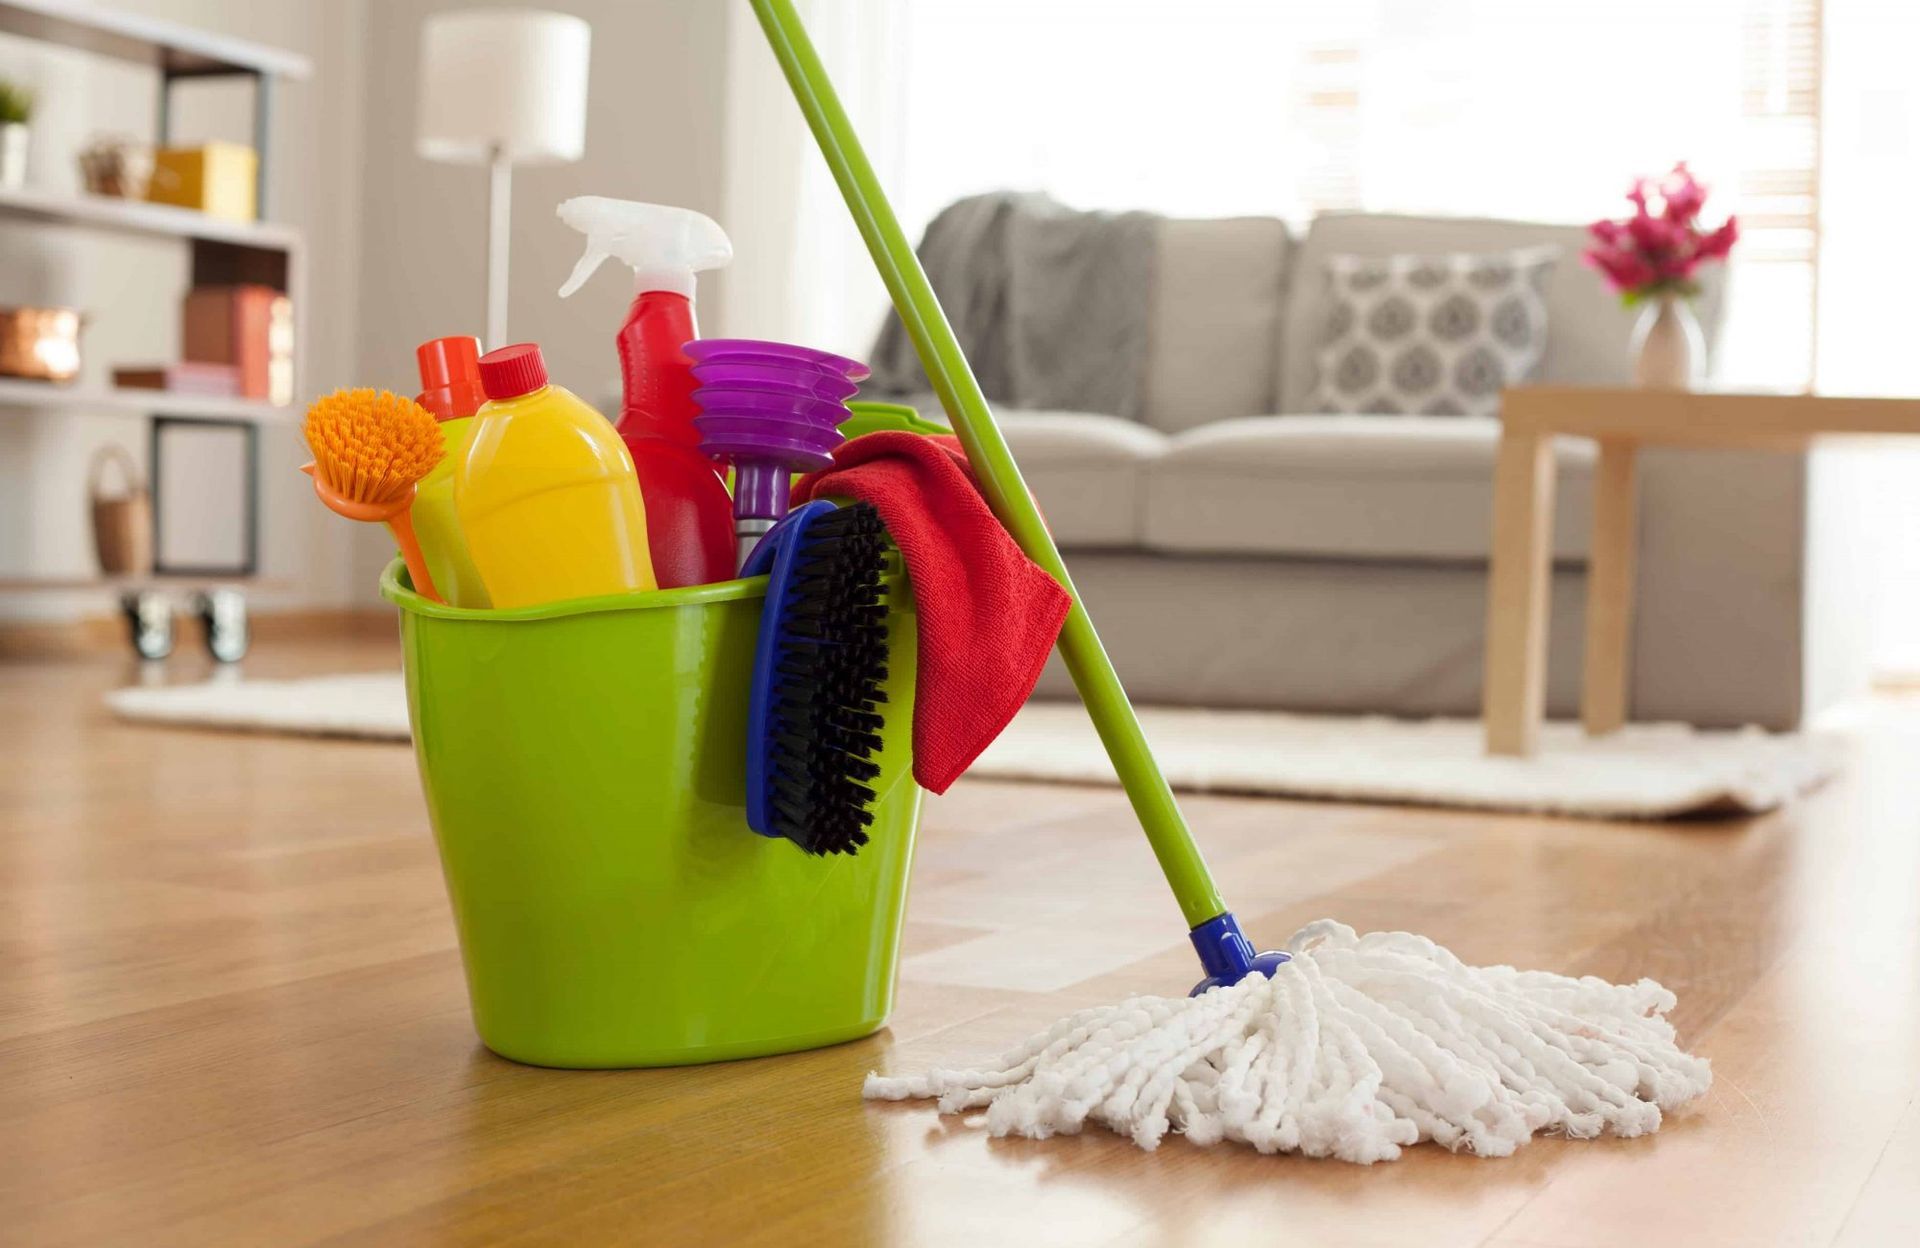 A green bucket filled with cleaning supplies and a mop in a living room.